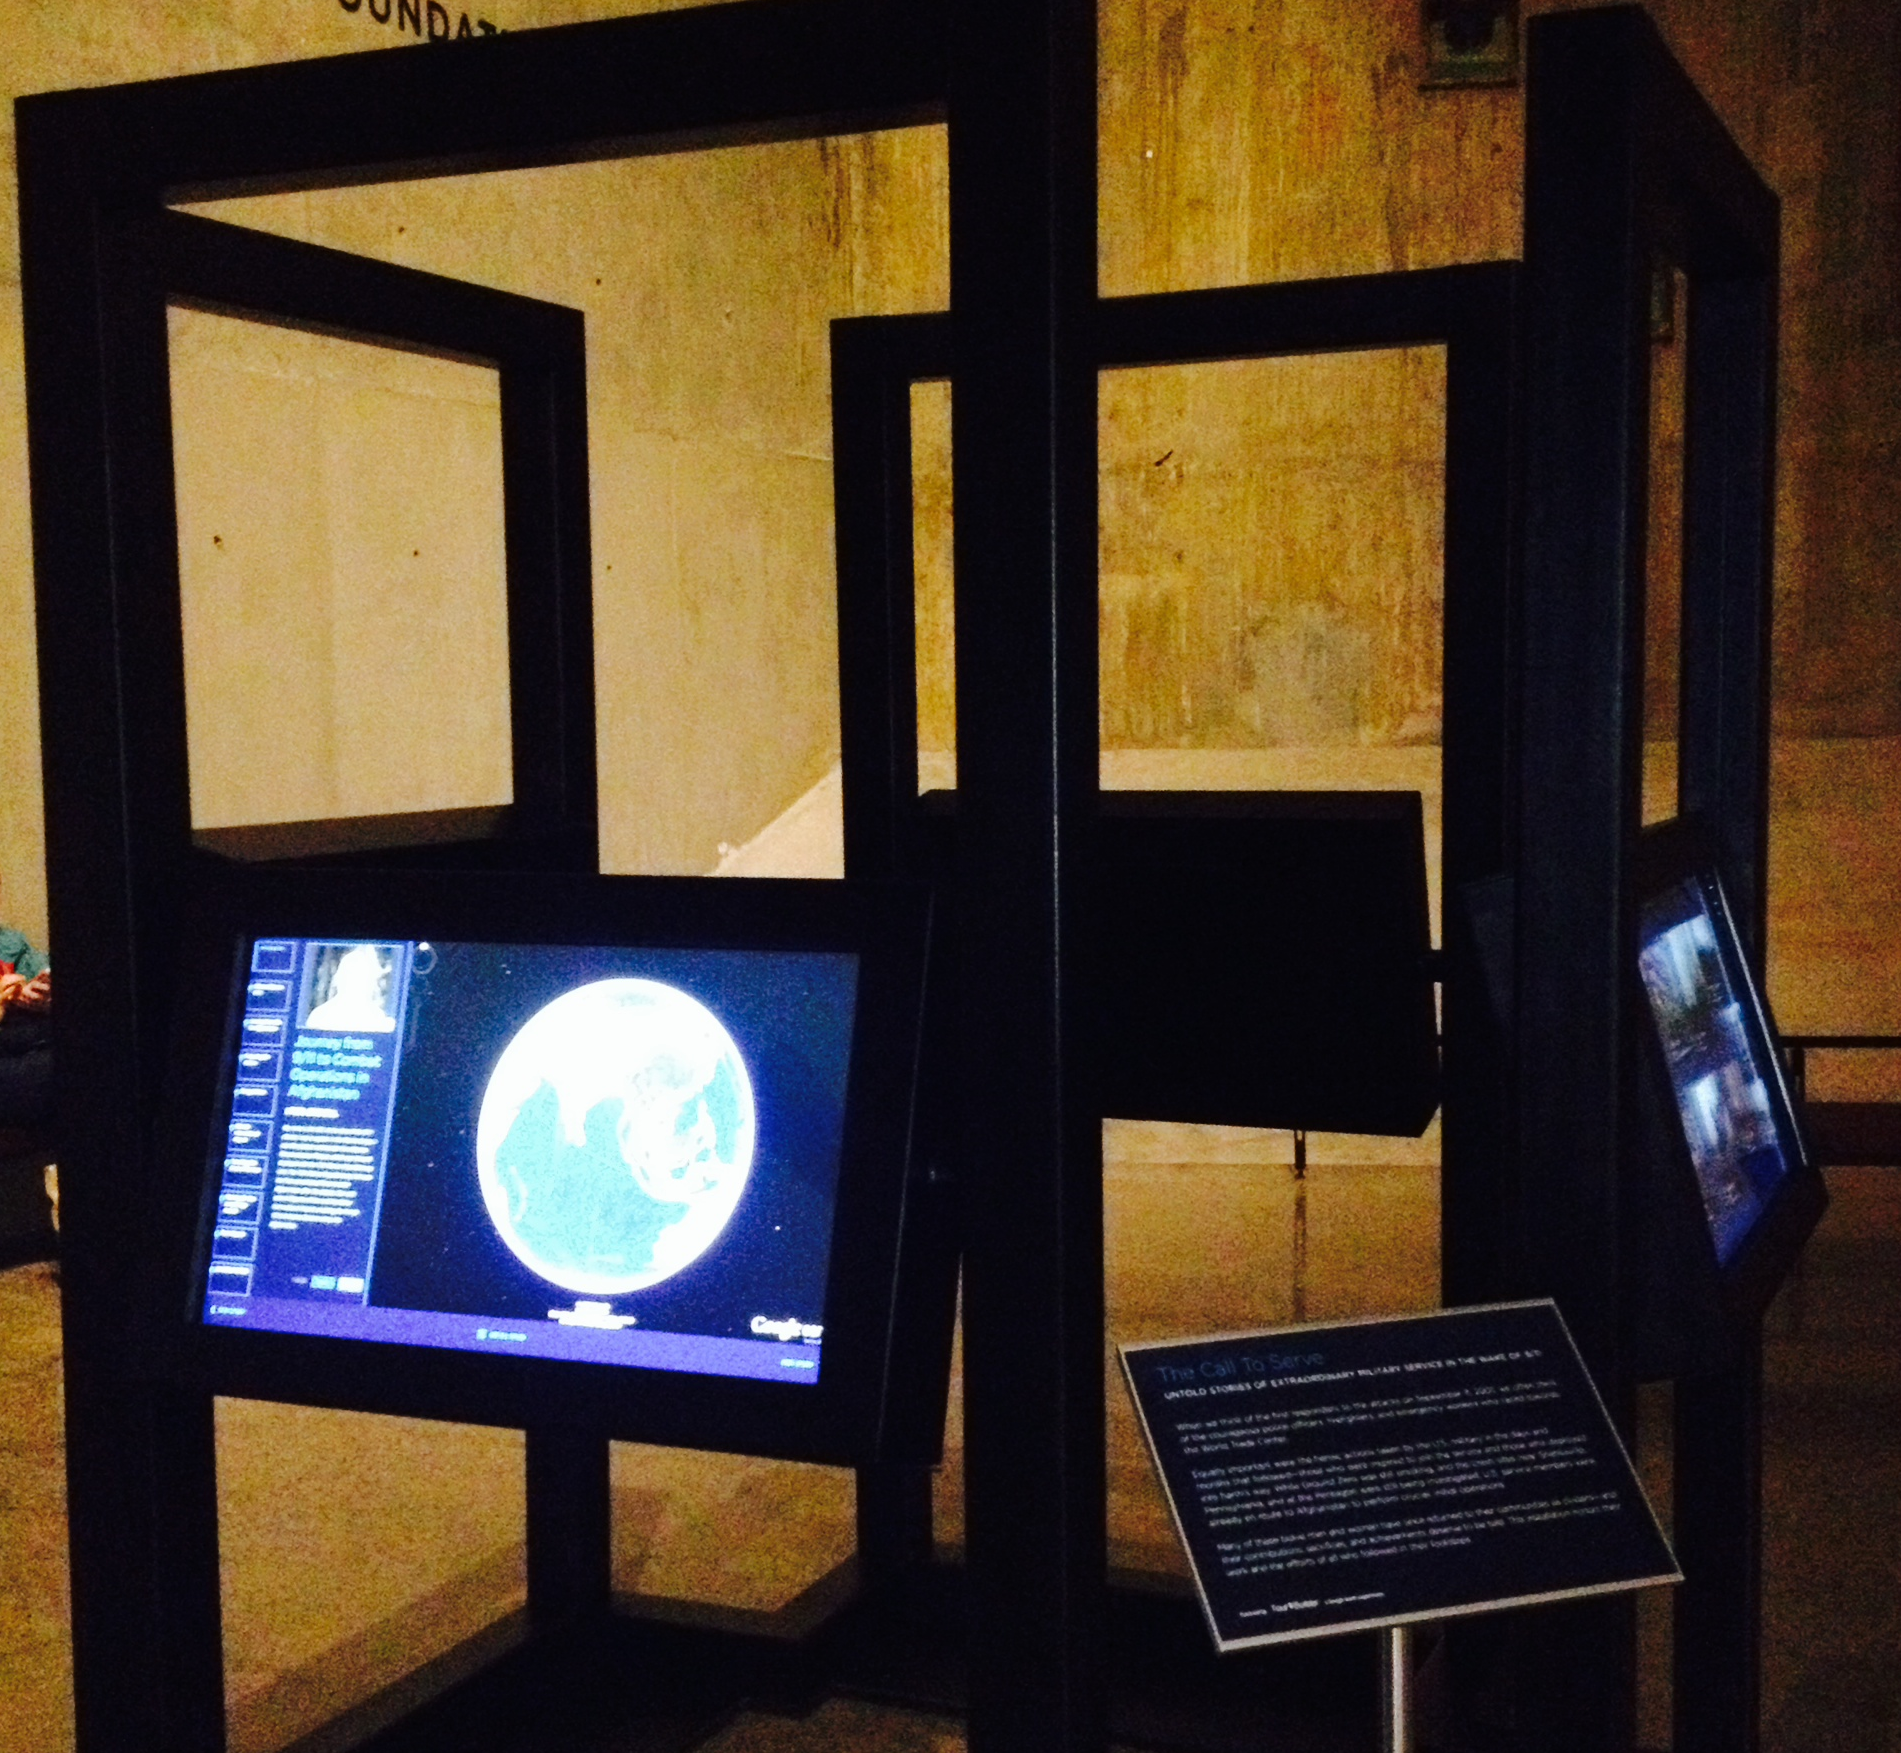 An interactive installation created in partnership with Google is seen in the Museum. It features four screens; the nearest screen is displaying a map of the world.